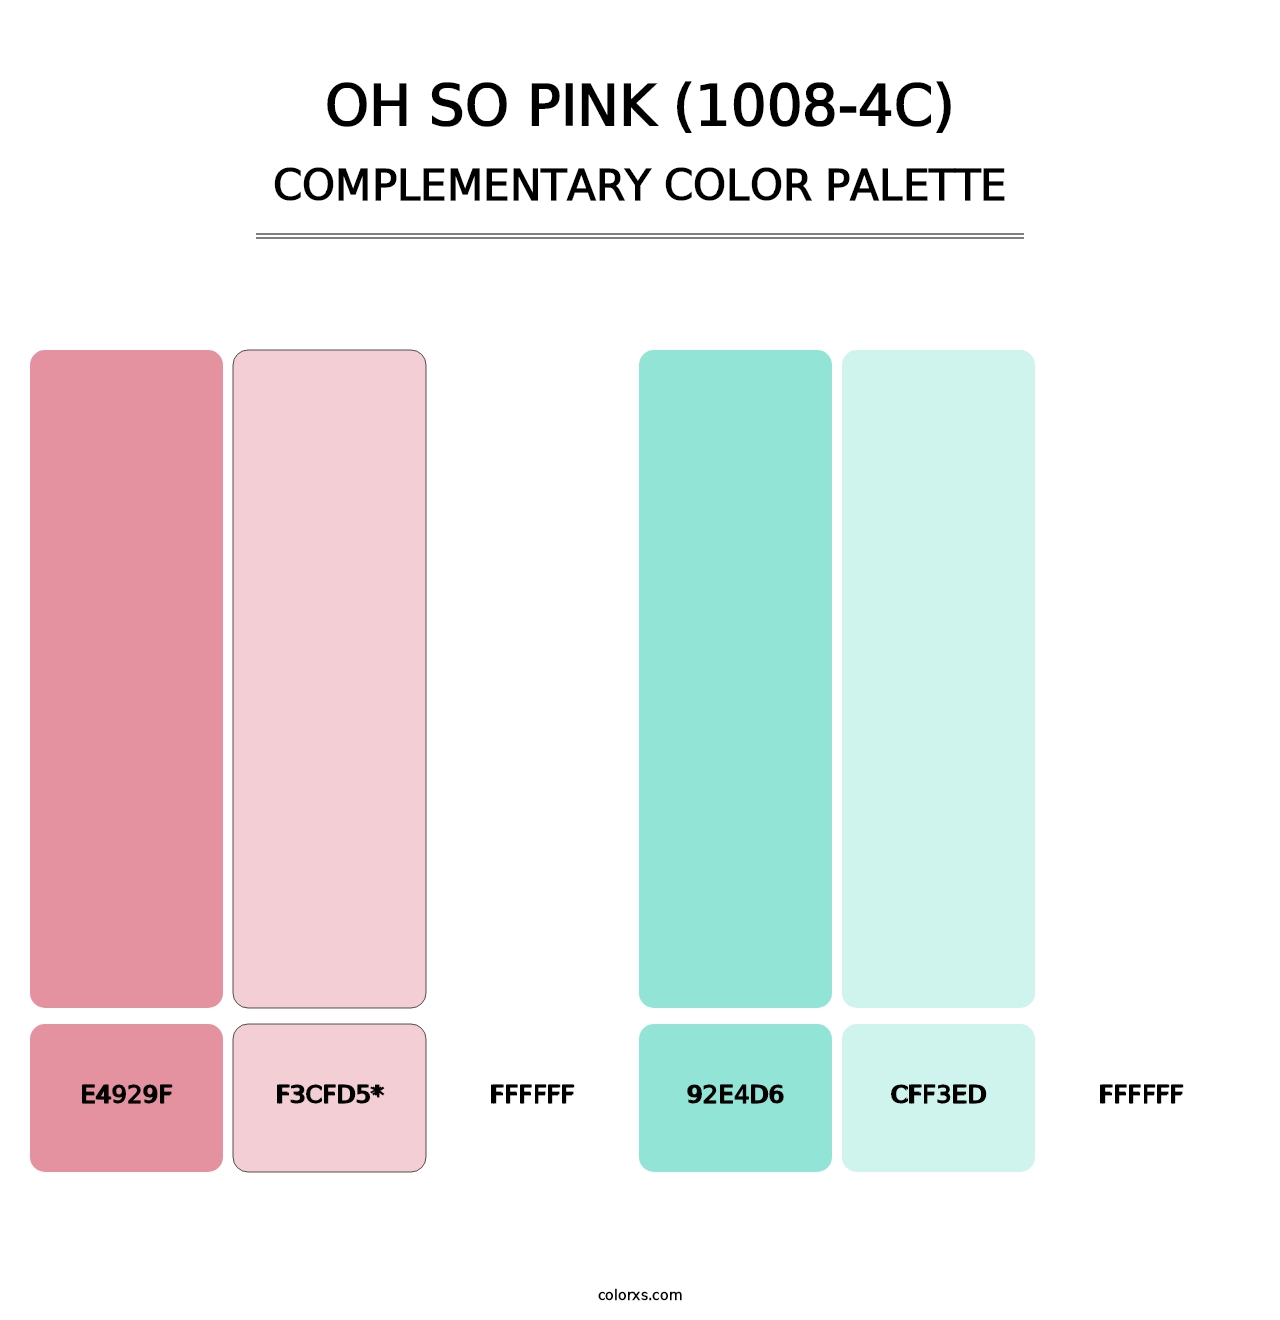 Oh So Pink (1008-4C) - Complementary Color Palette